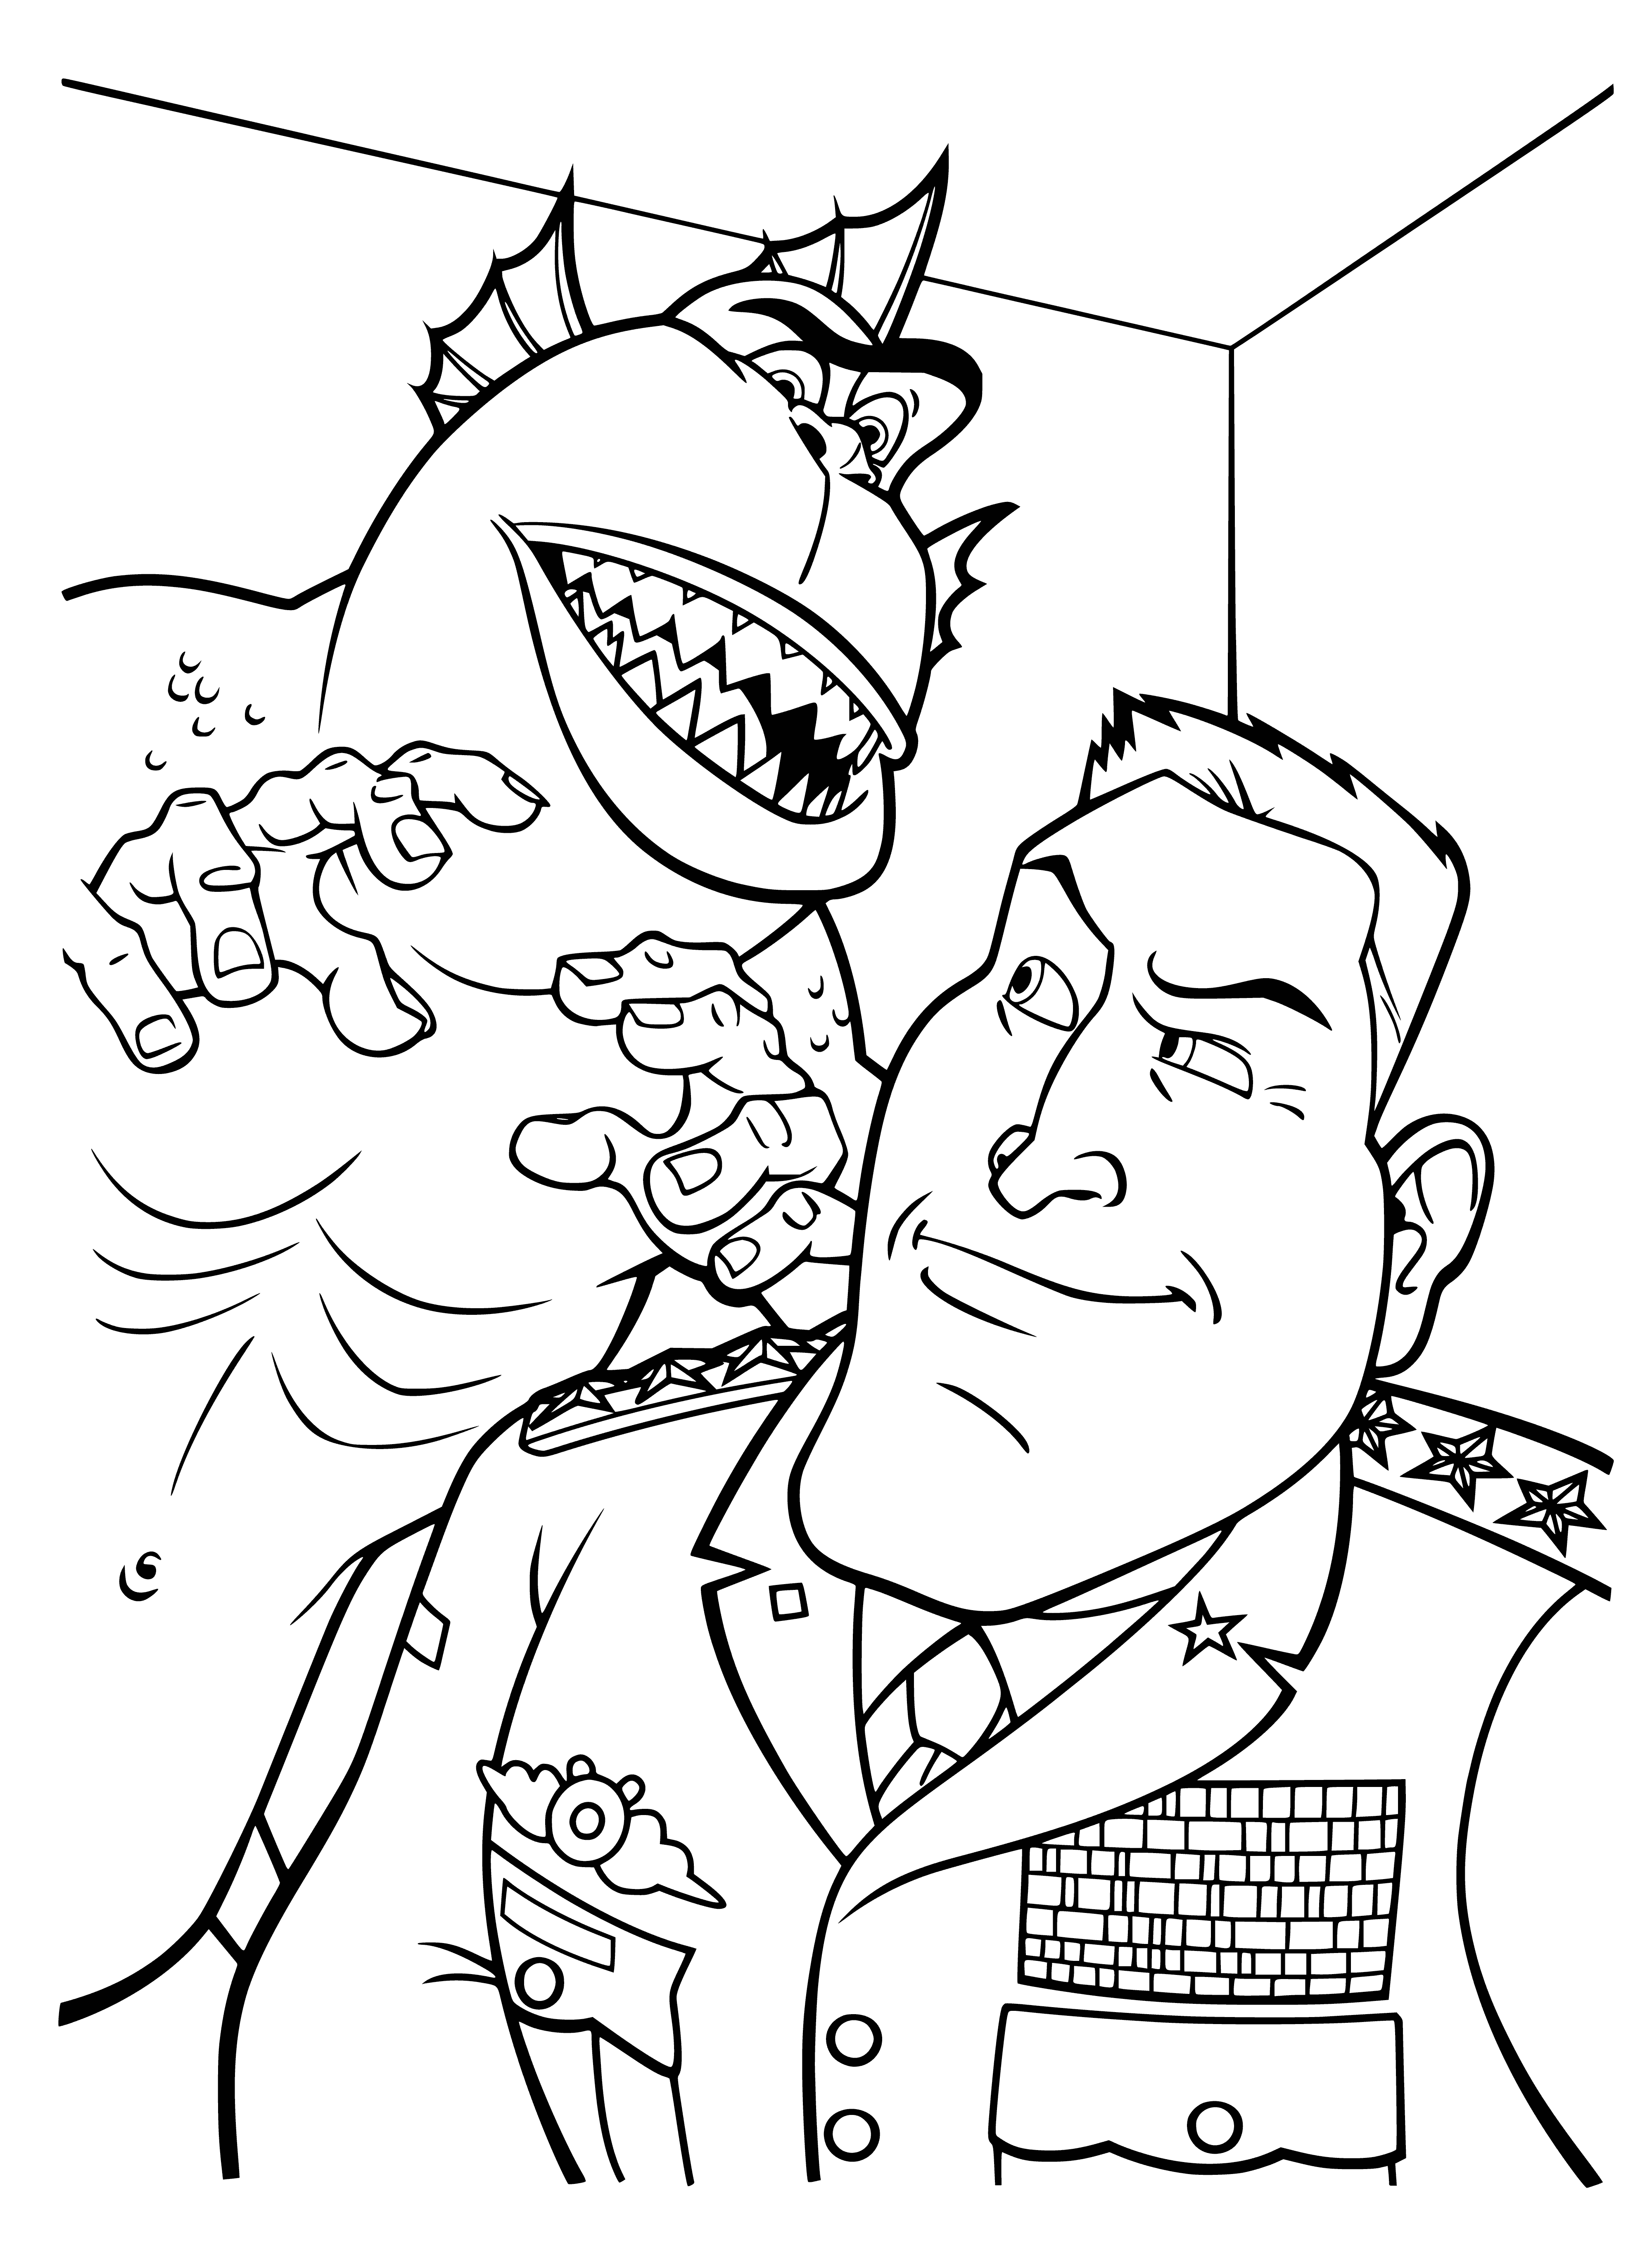 coloring page: Monster's vs Aliens is an action-packed game following the story of the Missing Link & Voyagers on a quest to go home. Help them find the Missing Link & get back to their planet!